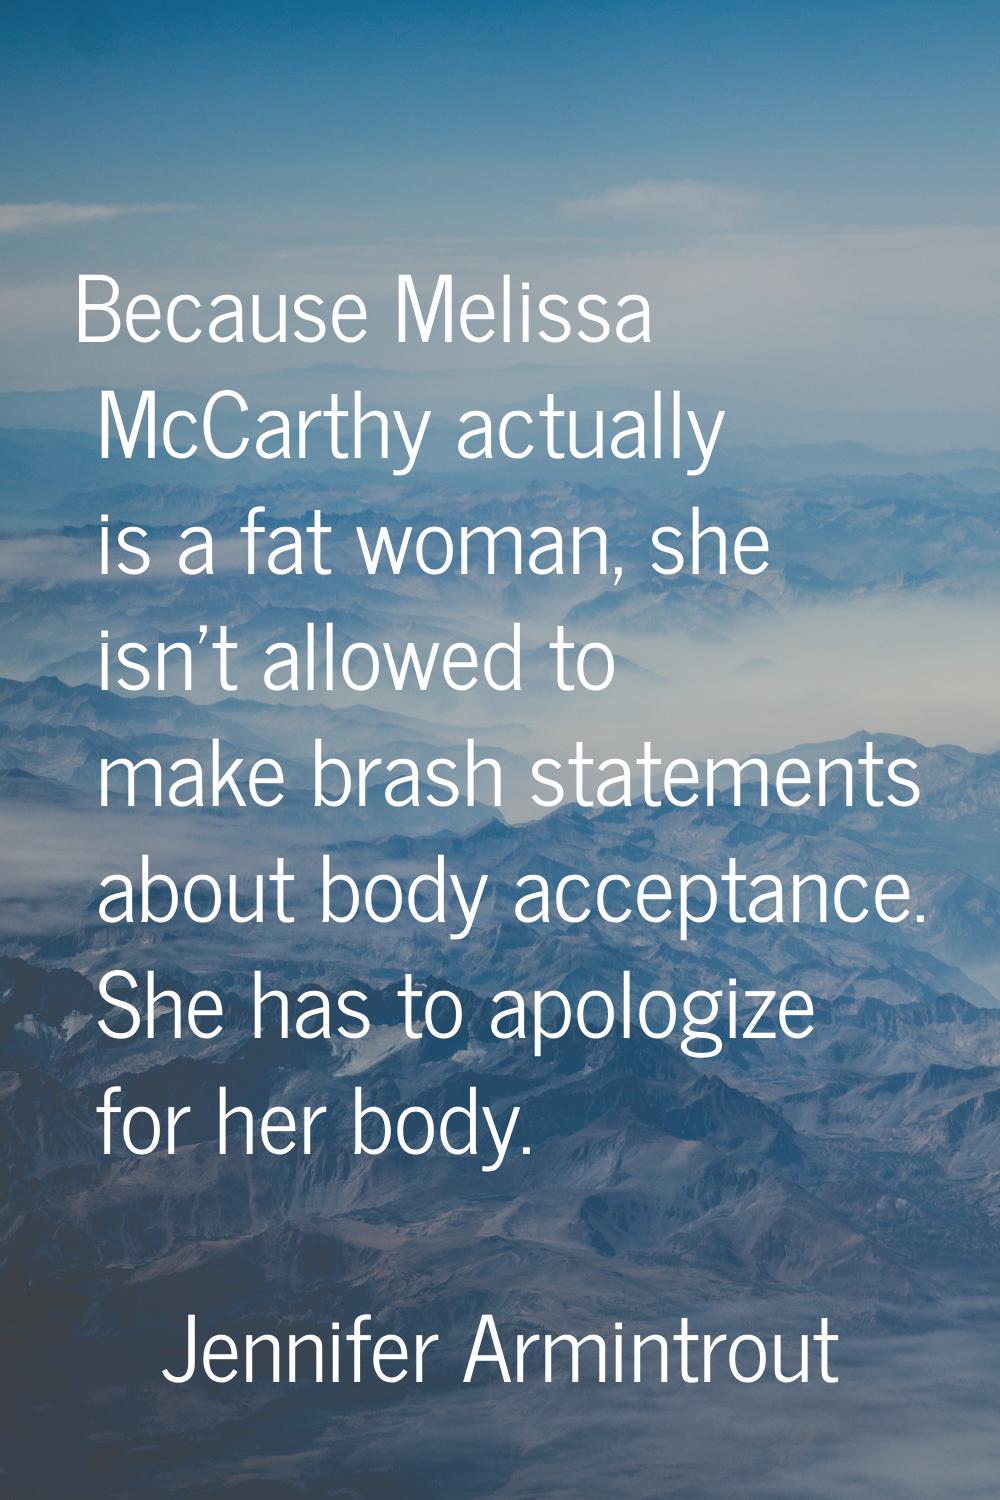 Because Melissa McCarthy actually is a fat woman, she isn't allowed to make brash statements about 